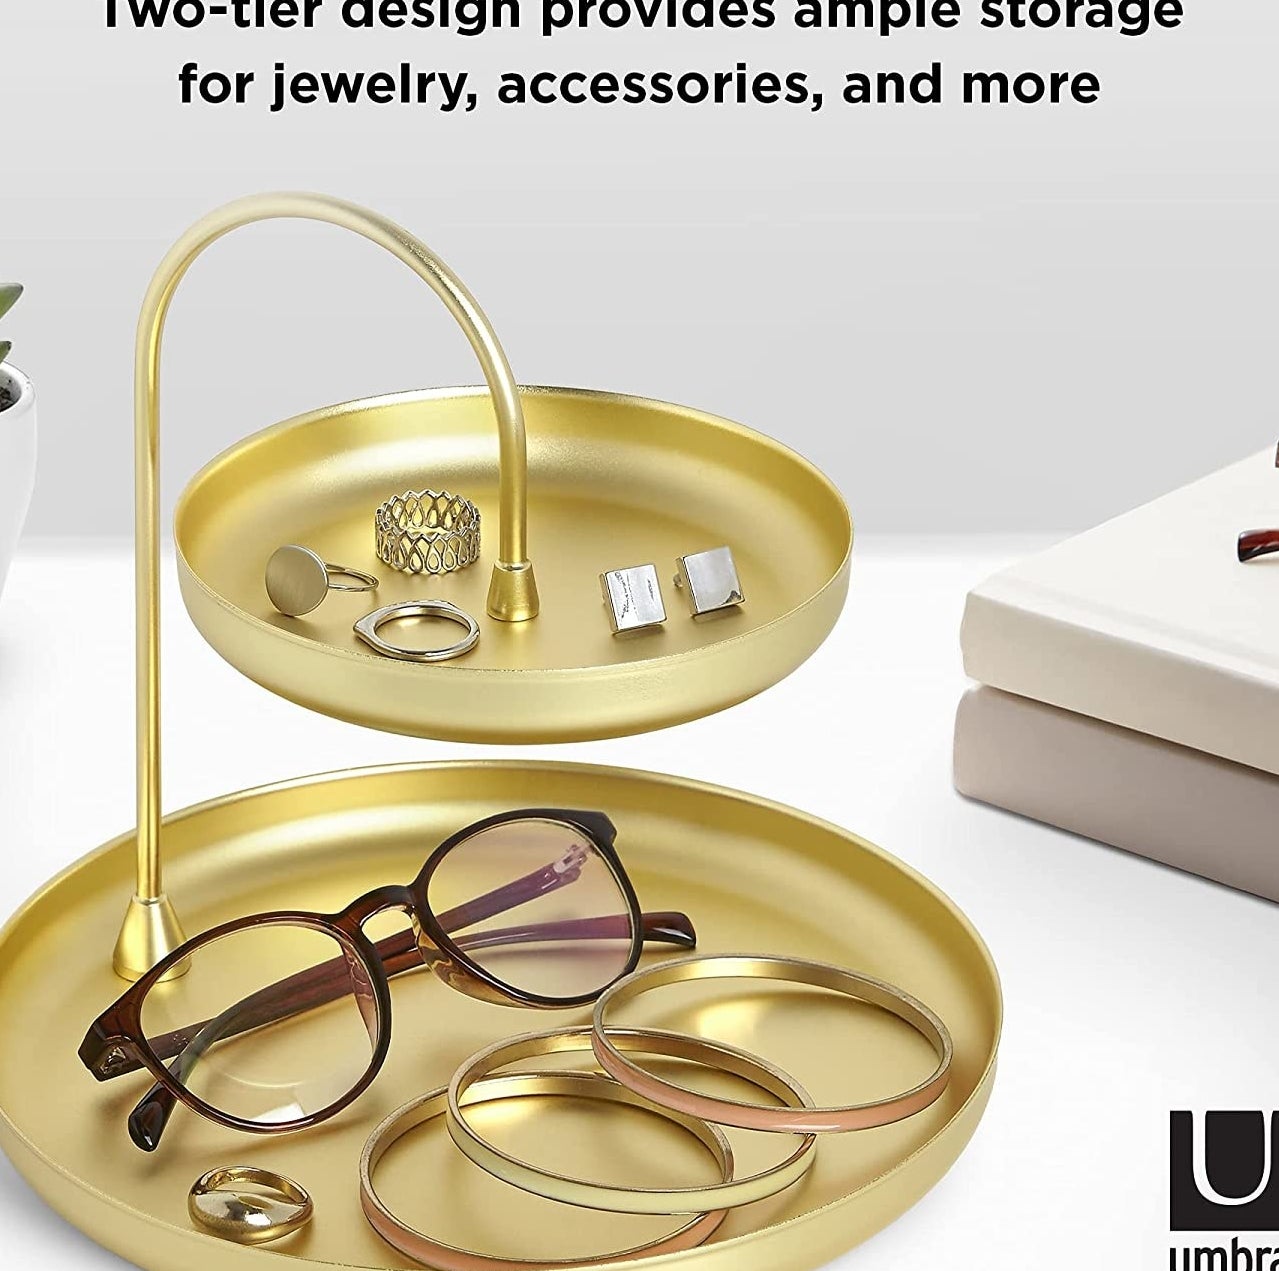 a two-tiered brass tray with rings, glasses, and other jewellery on it